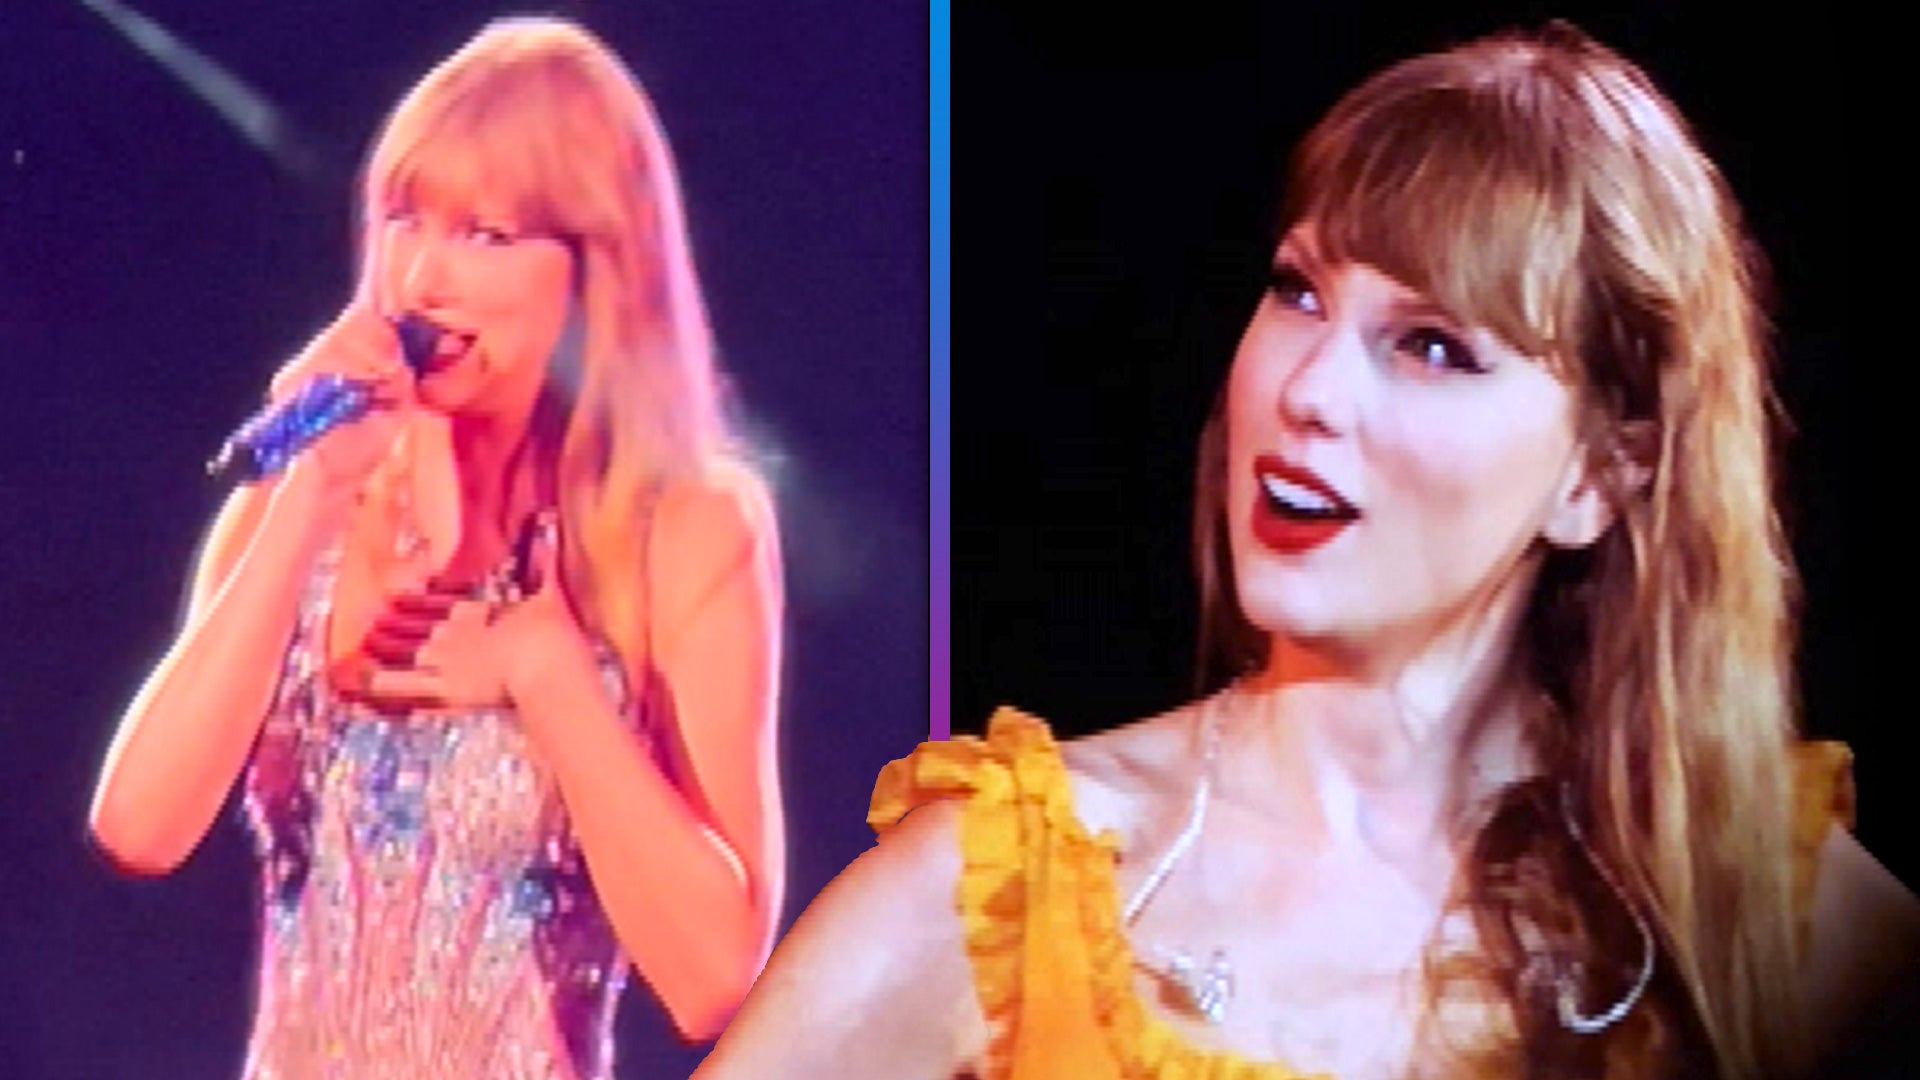 Taylor Swift wraps up first leg of The Eras tour with a glass of wine